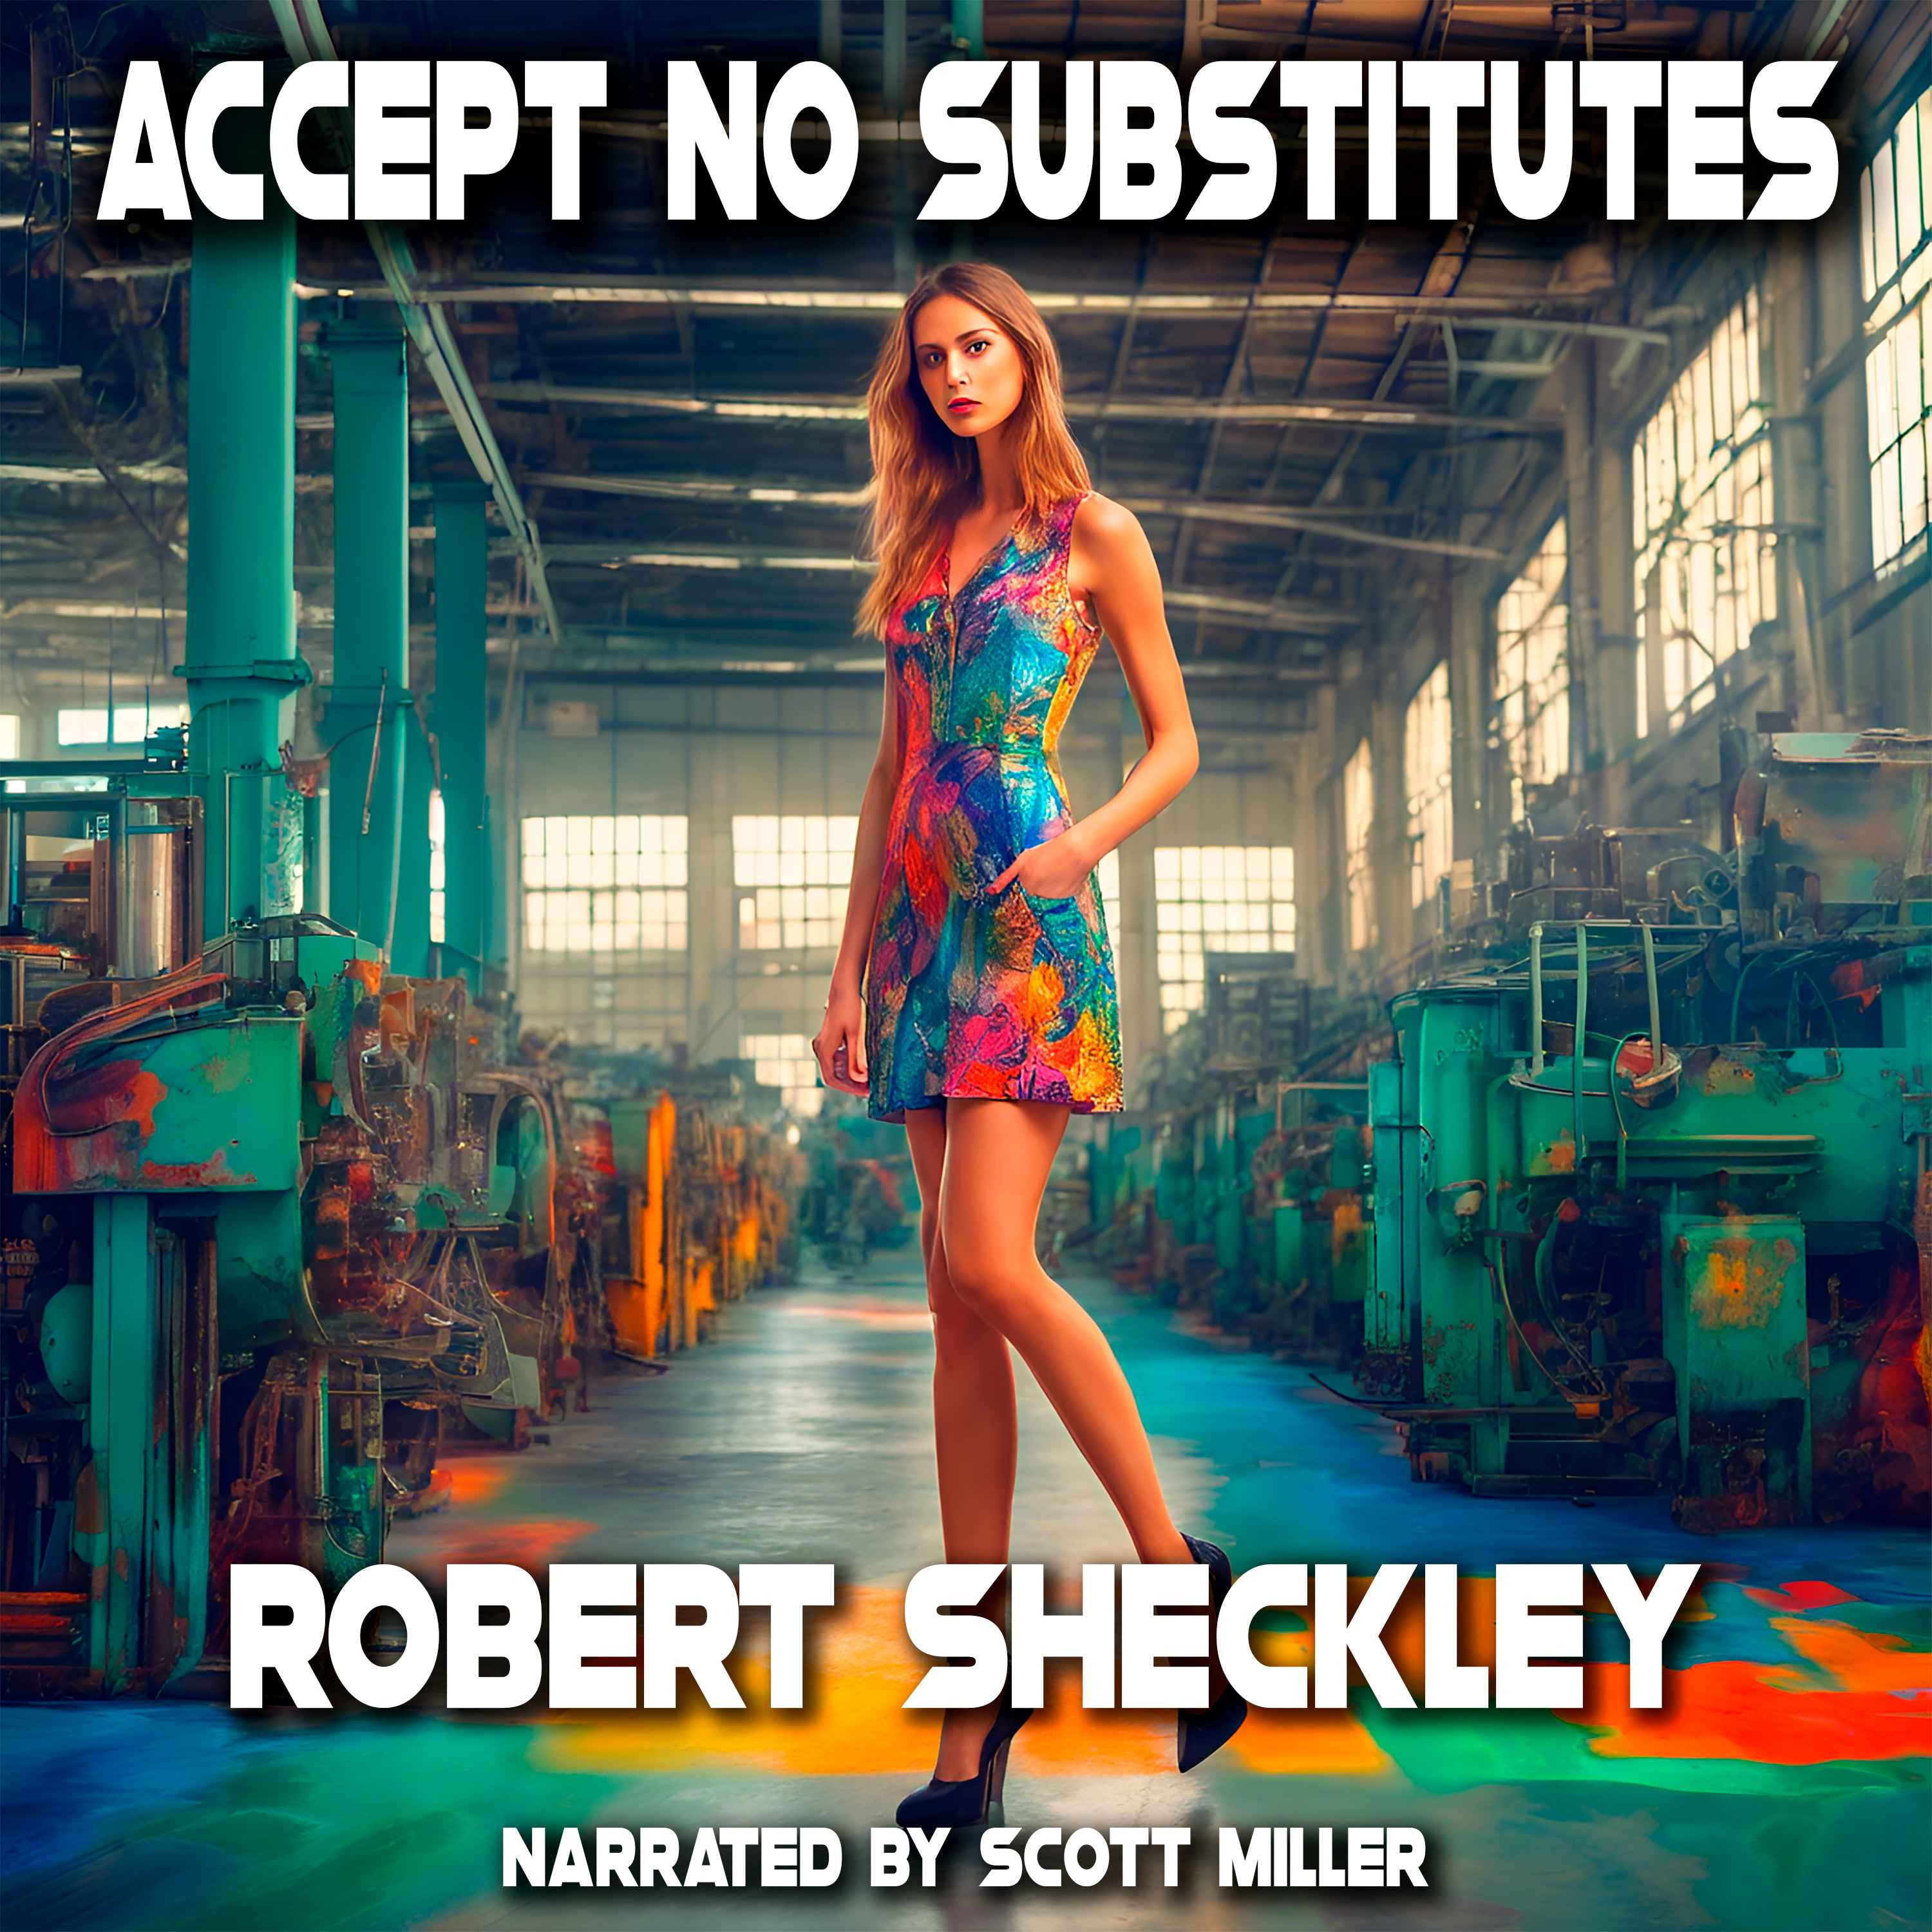 Accept No Substitutes by Robert Sheckley - She Was Made for Love, a Rowdy Story by Robert Sheckley